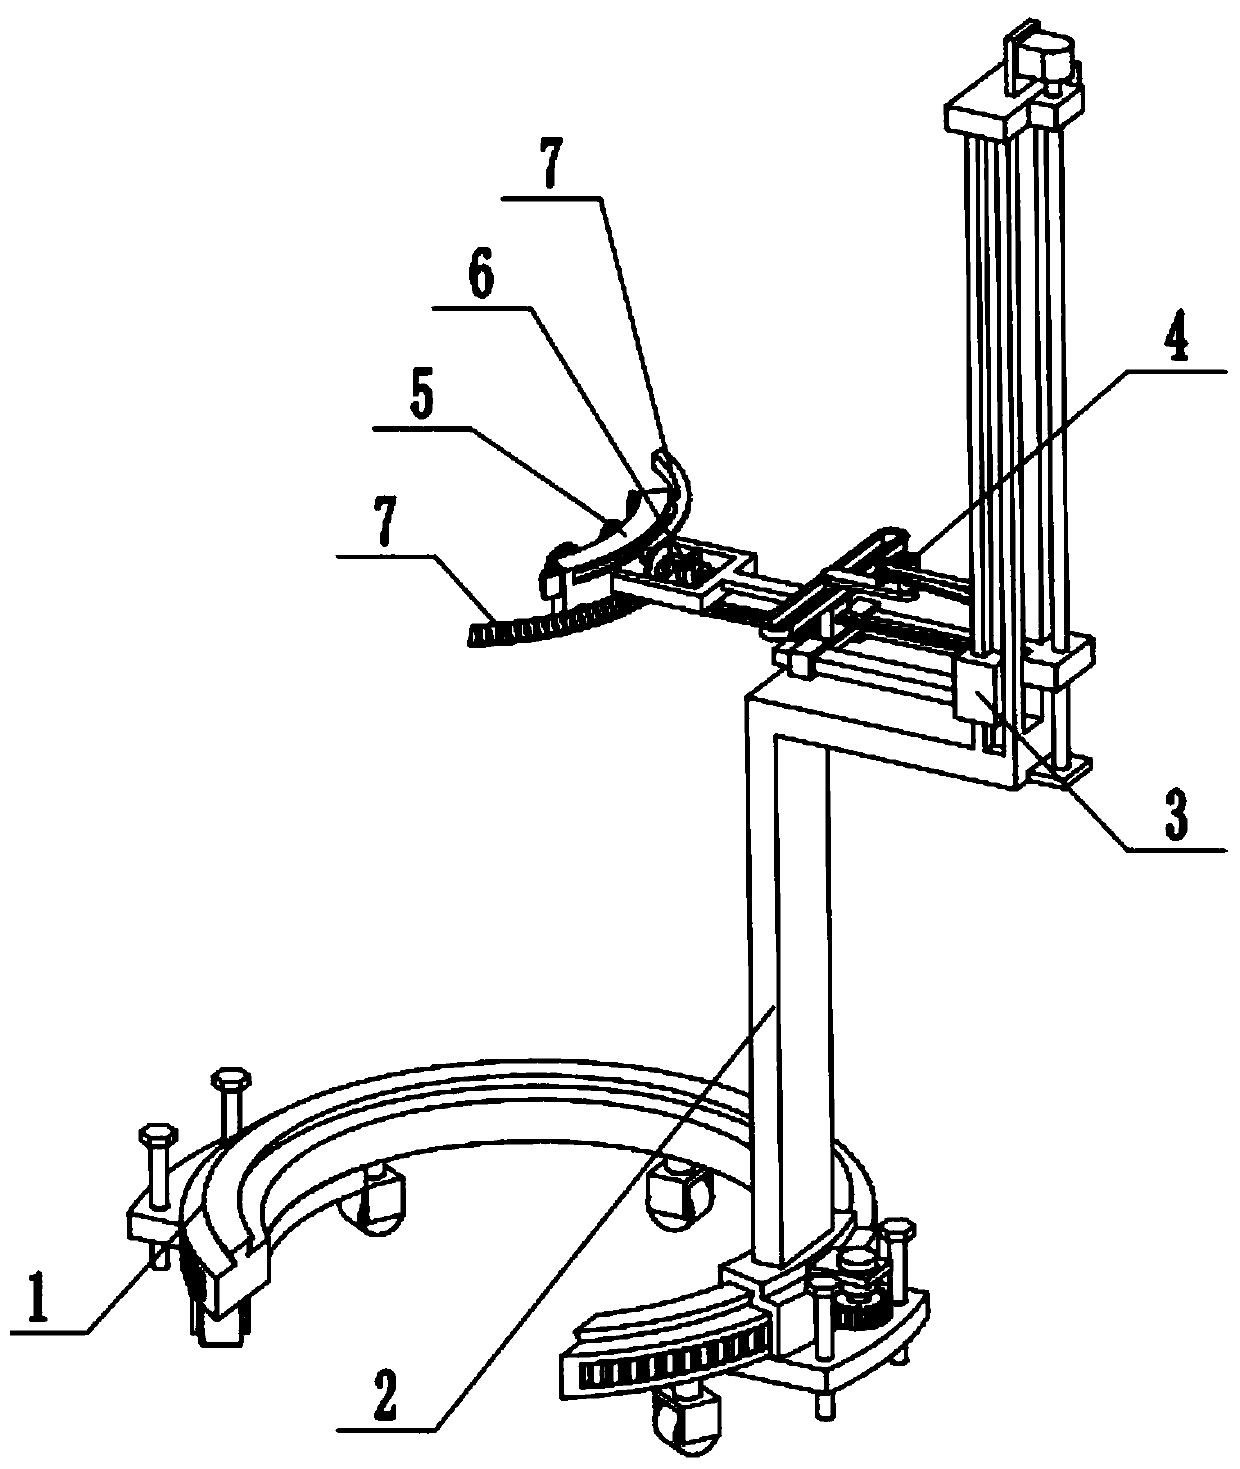 High-position branch pruning device